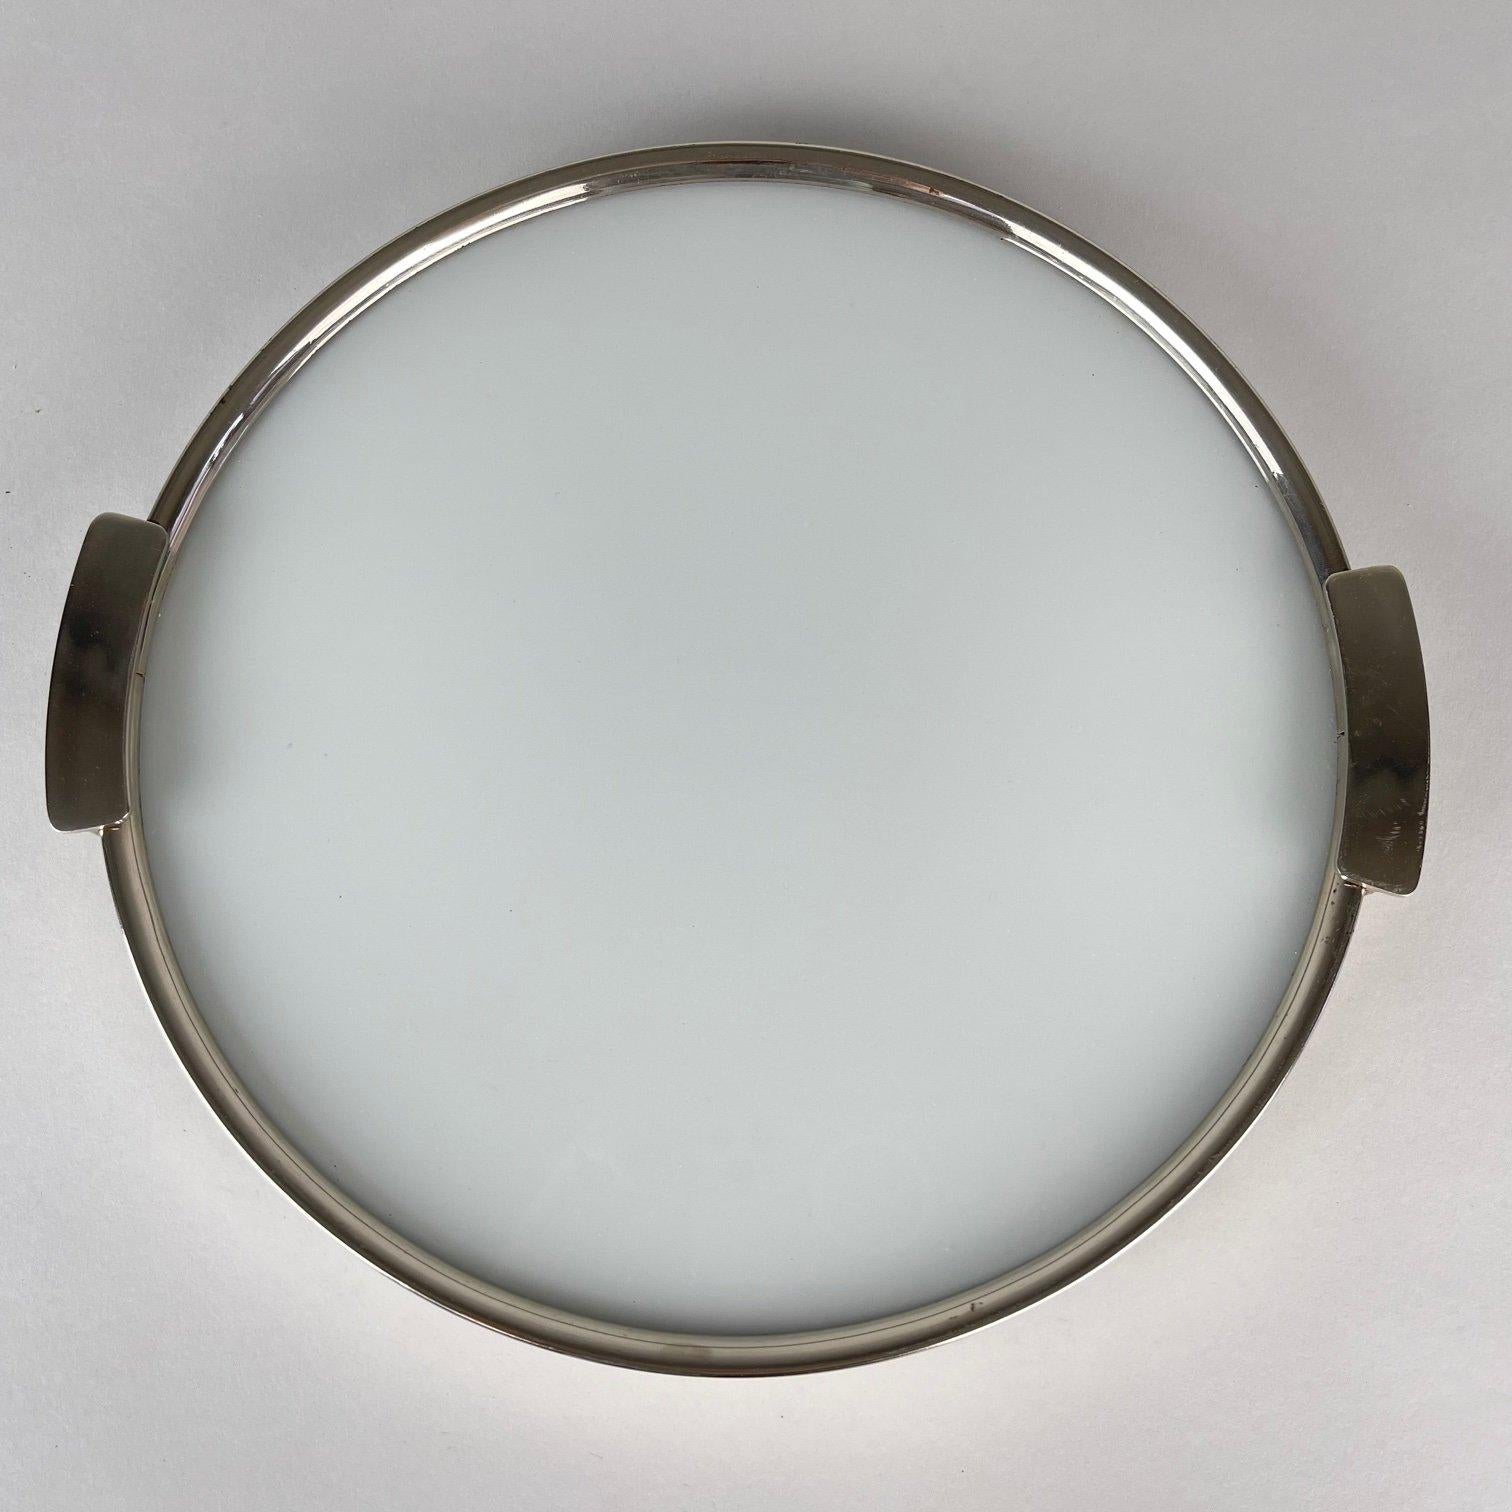 Beautiful Art Deco round tray made of chromed metal and milk glass.